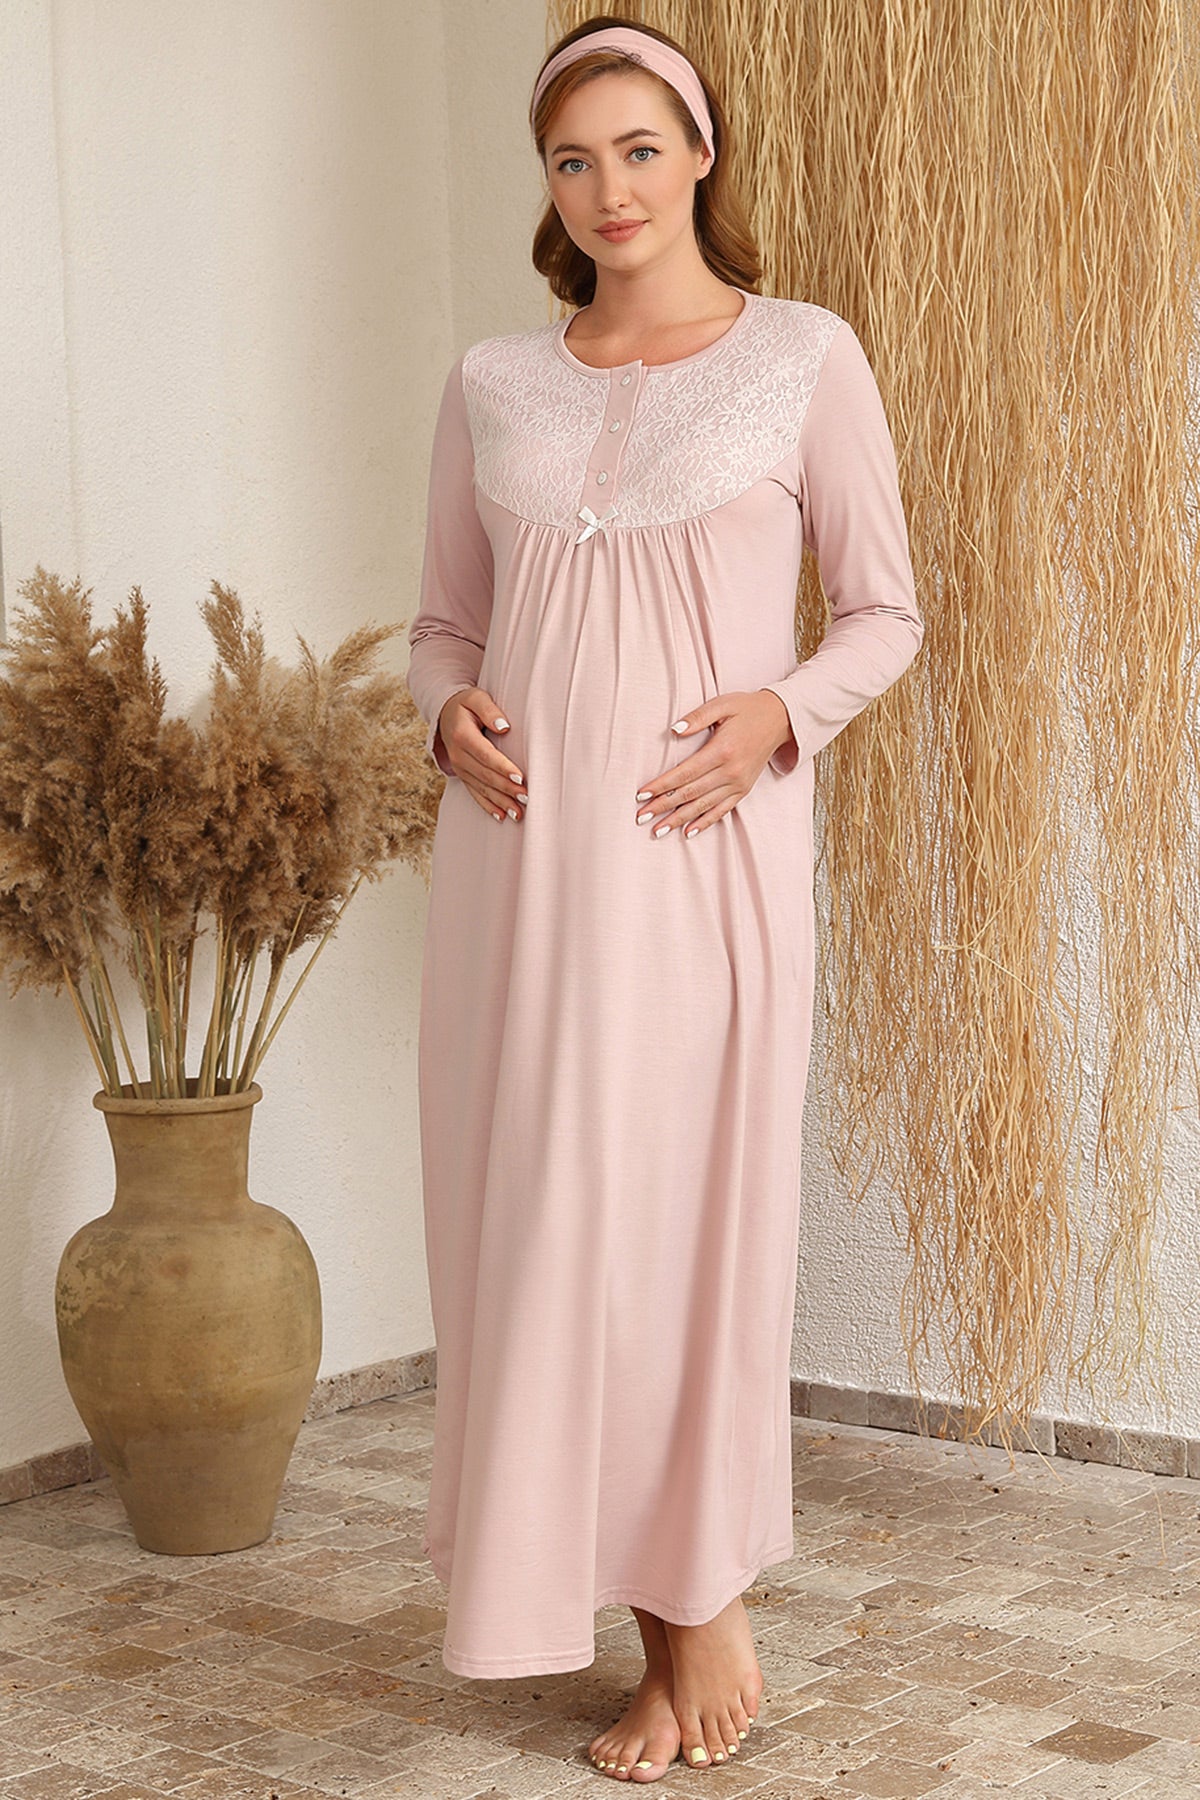 Shopymommy 4416 Lace Collar Maternity & Nursing Nightgown With Robe Powder